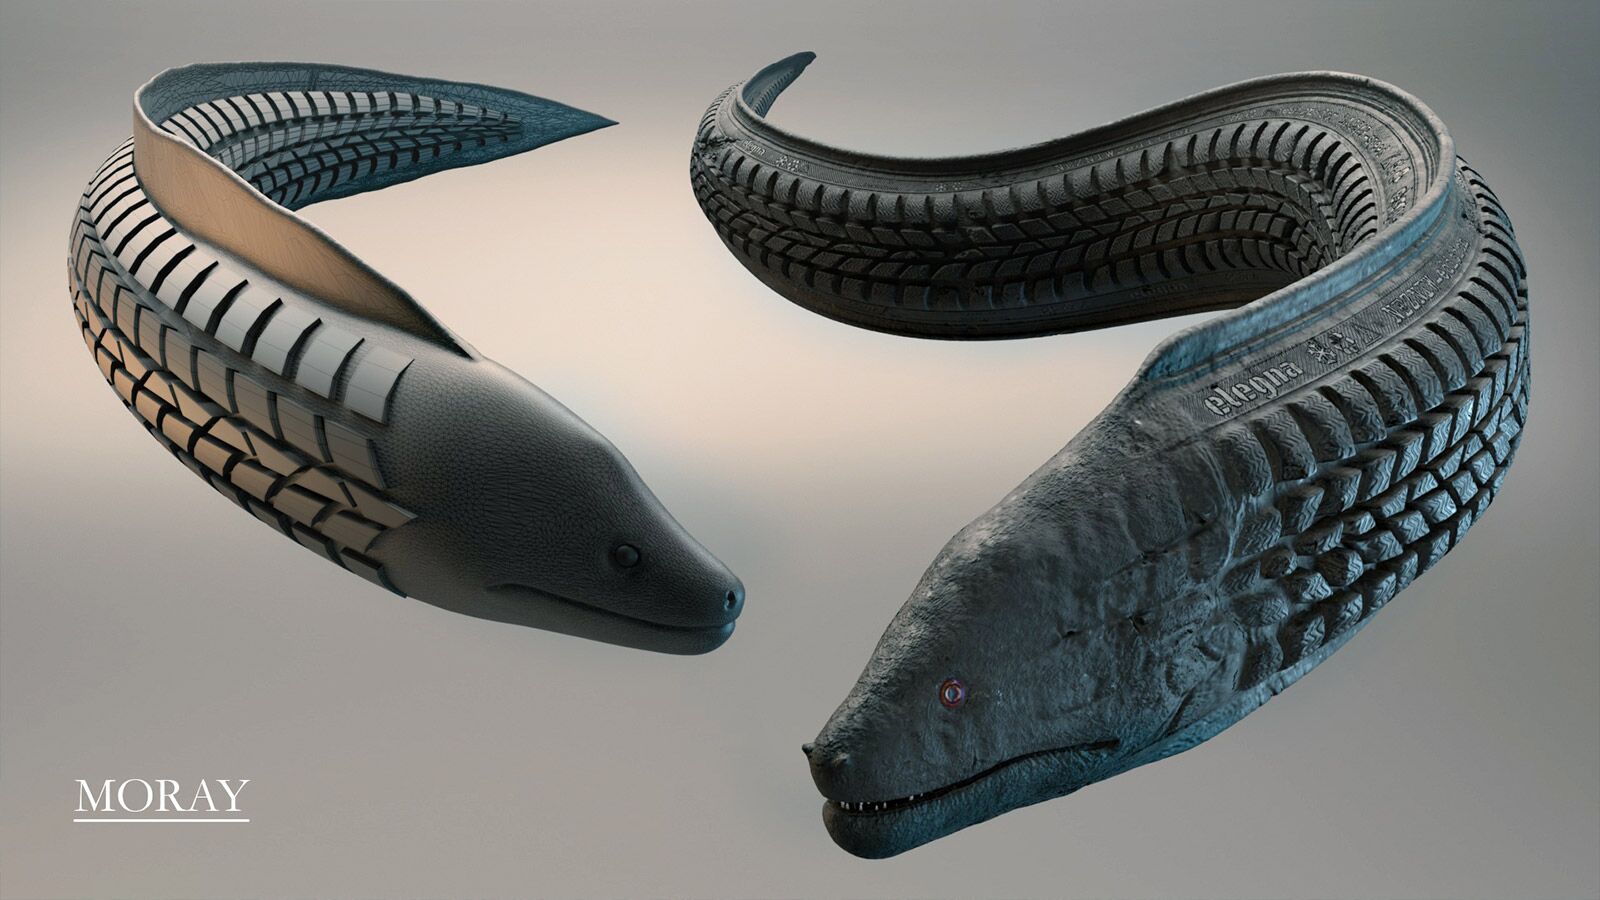 3D model of a moray made from car tyres